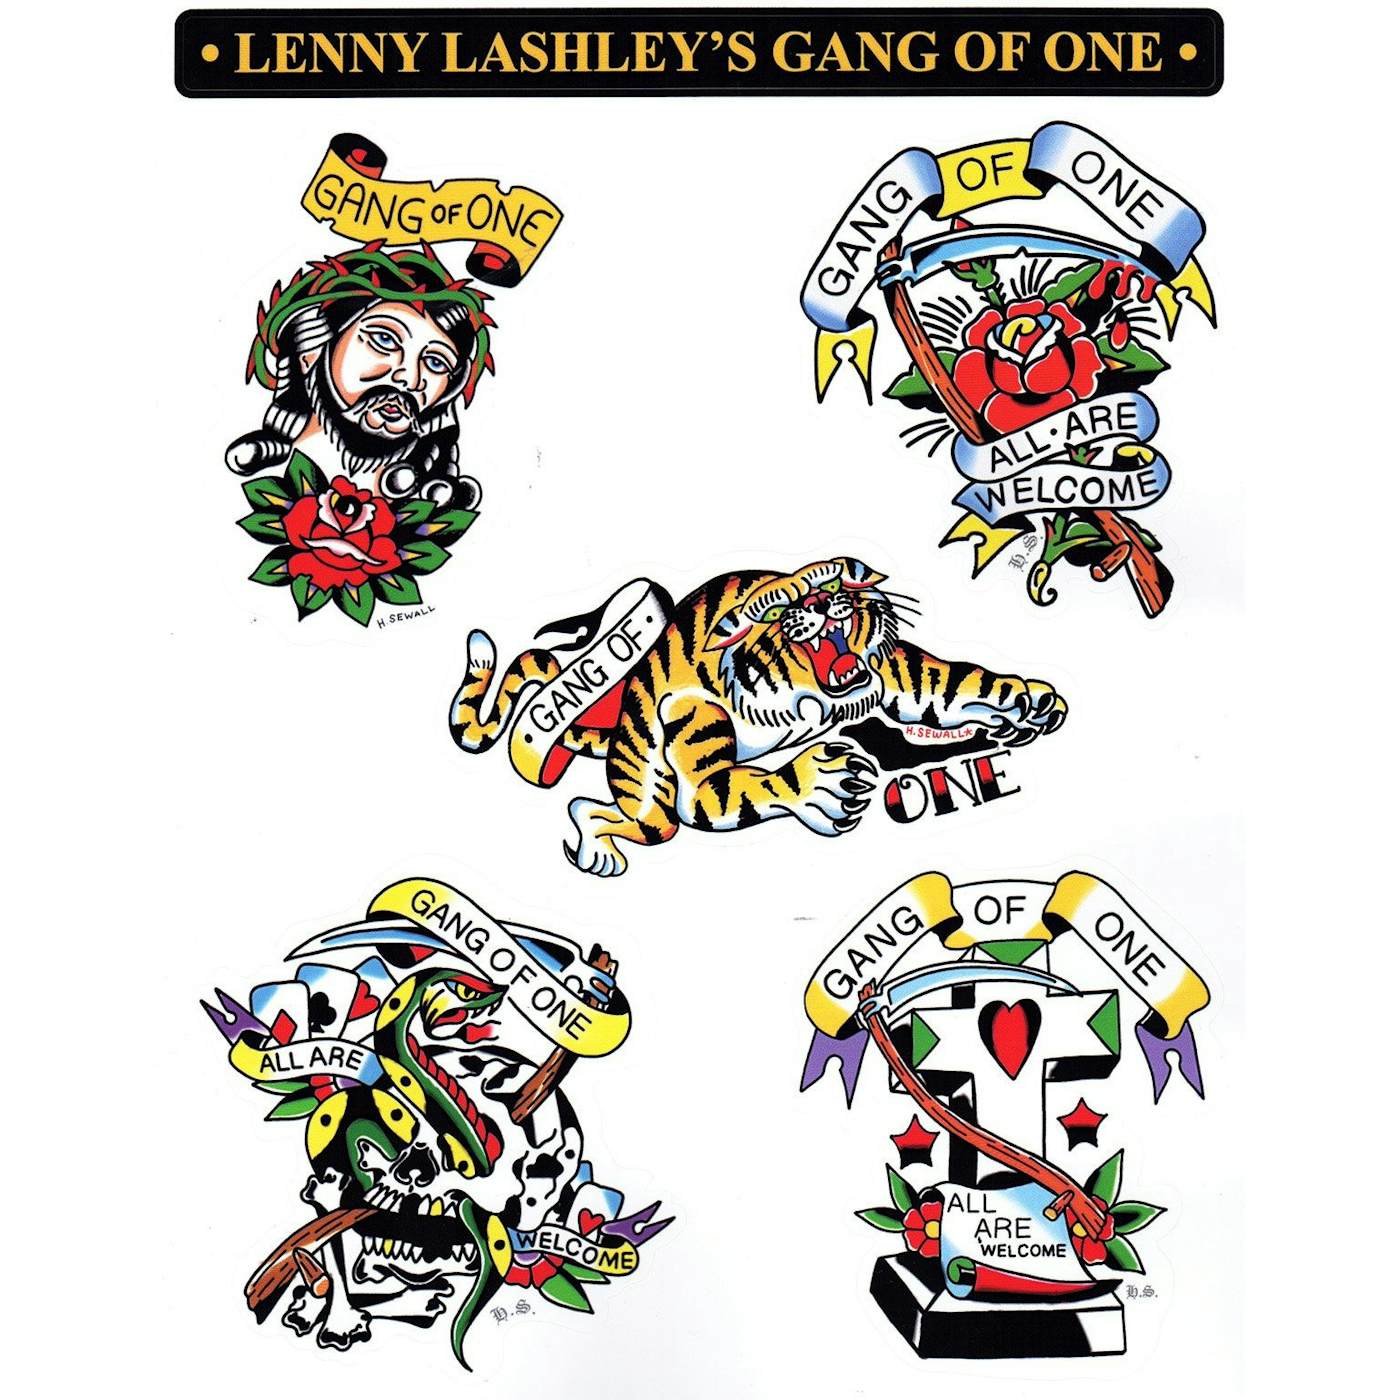 Lenny Lashley's Gang Of One - "All Are Welcome" Tattoo Sheet